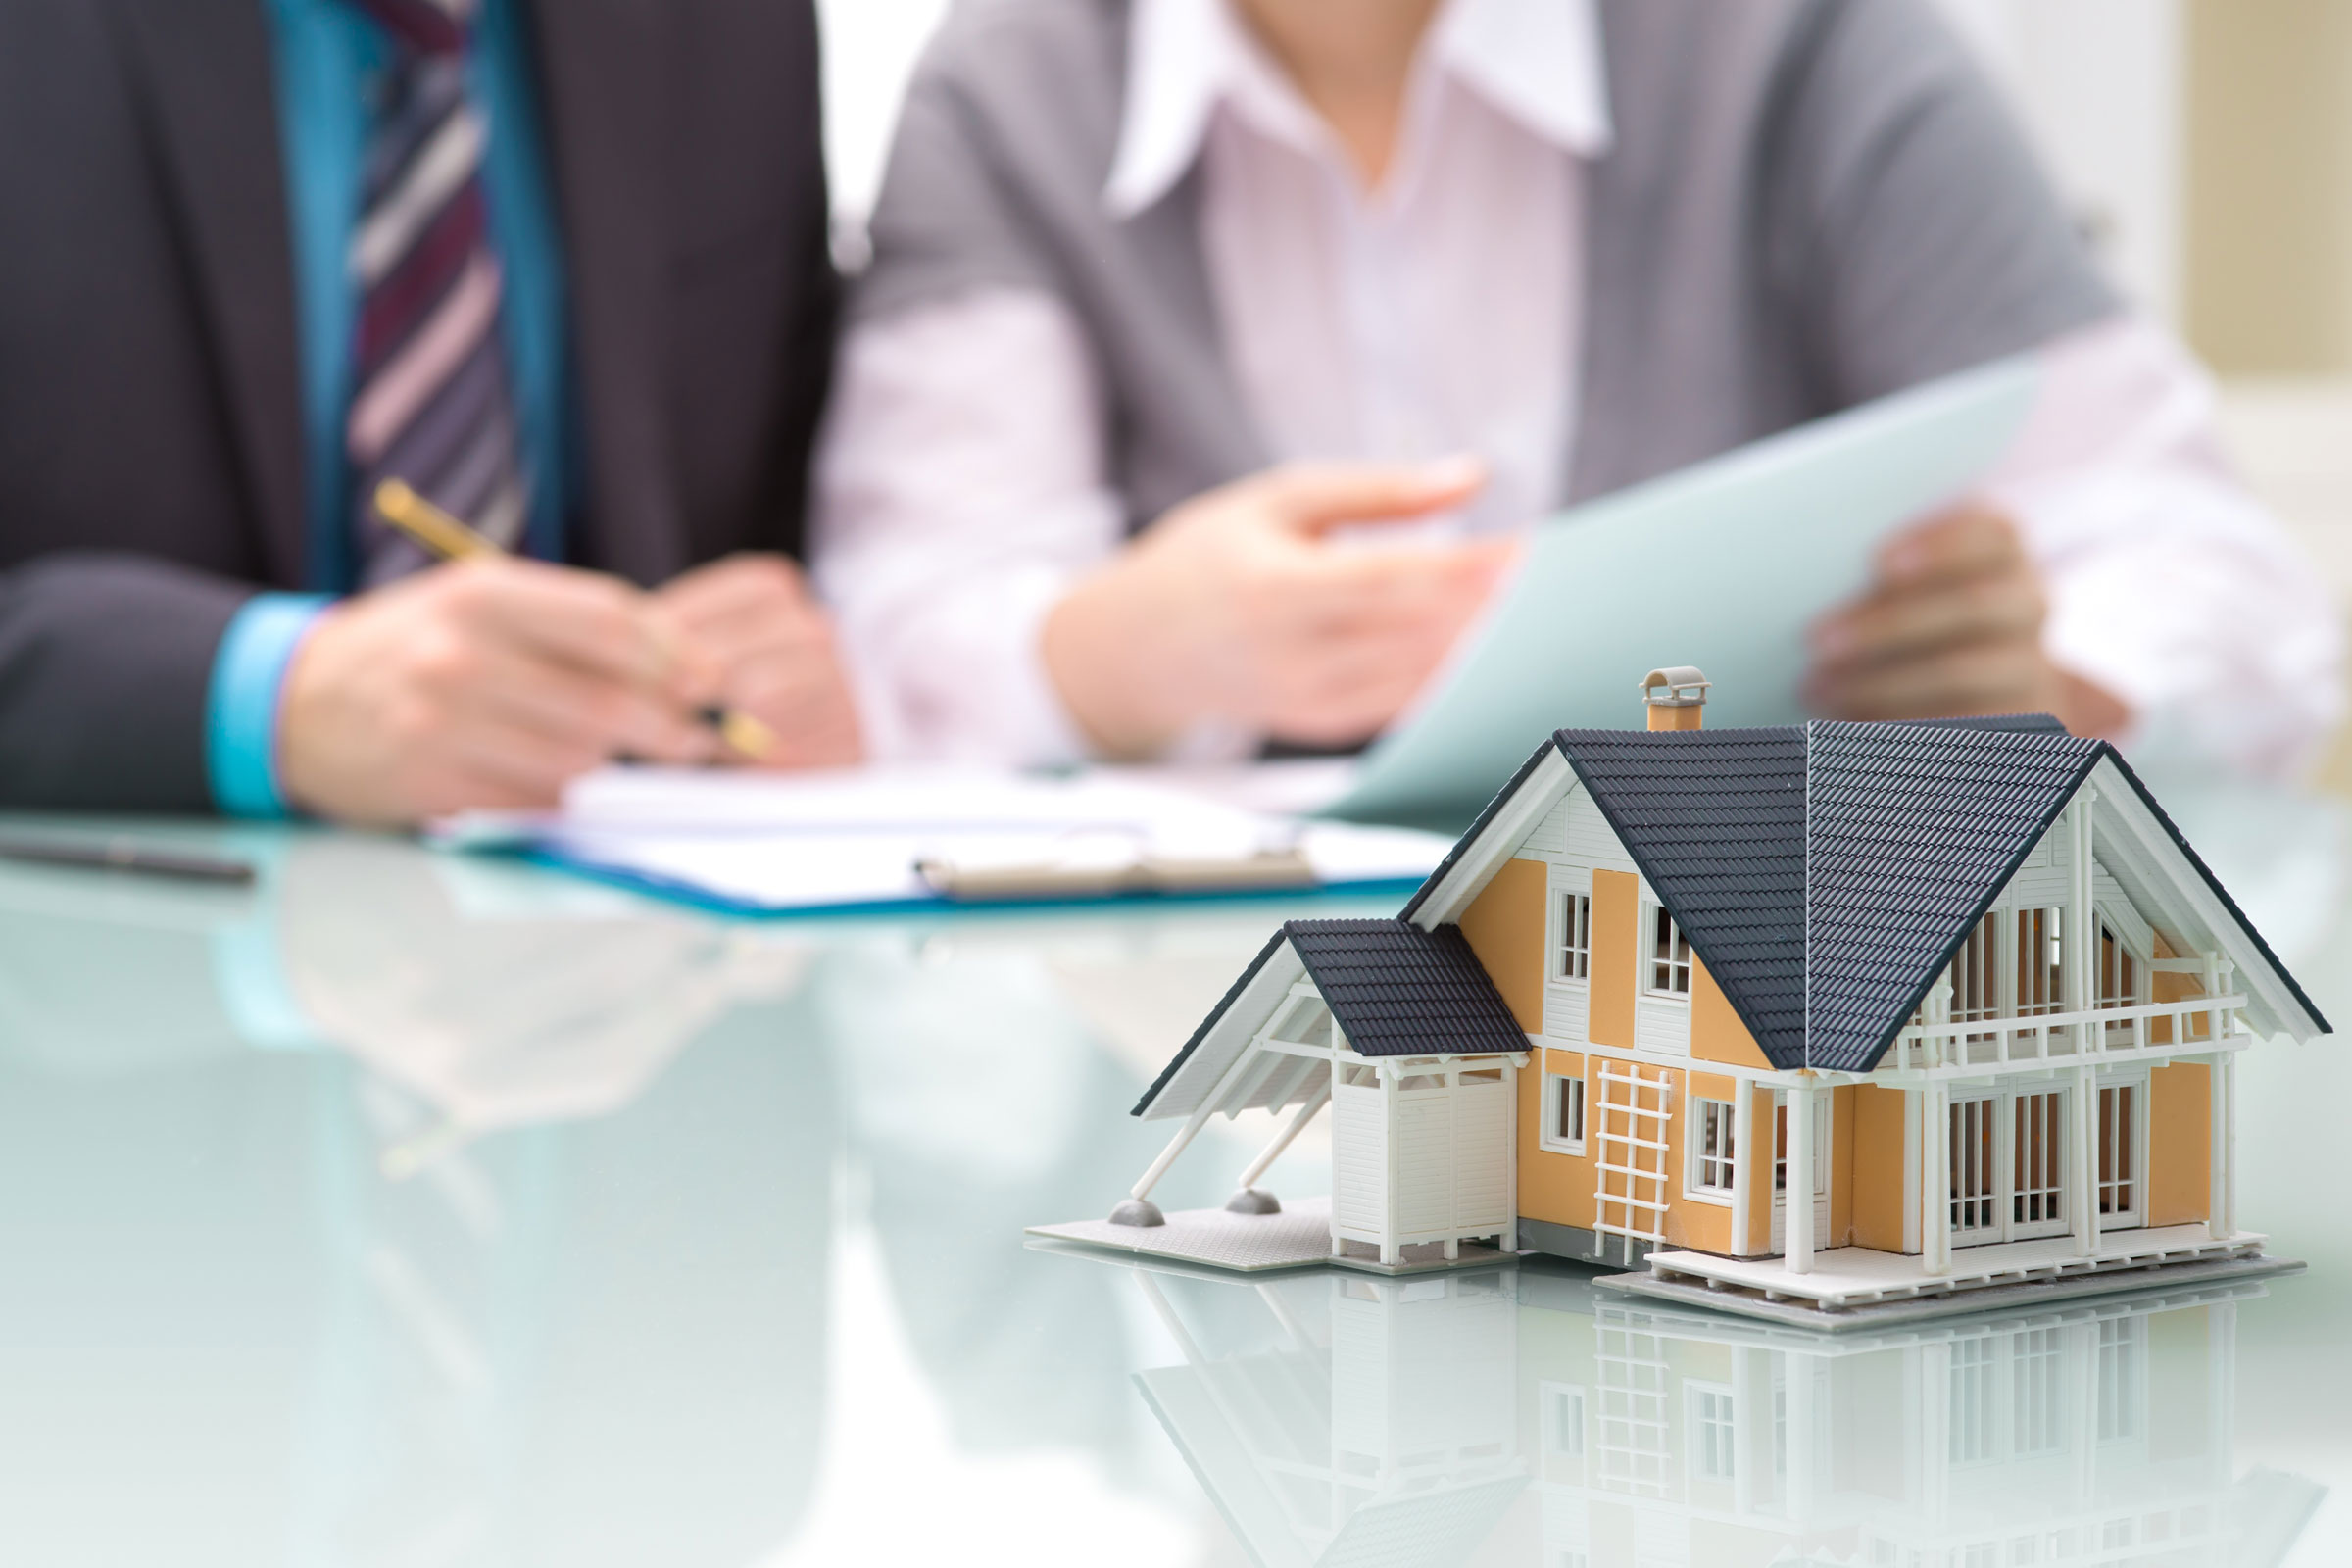 Selecting a Mortgage Lender